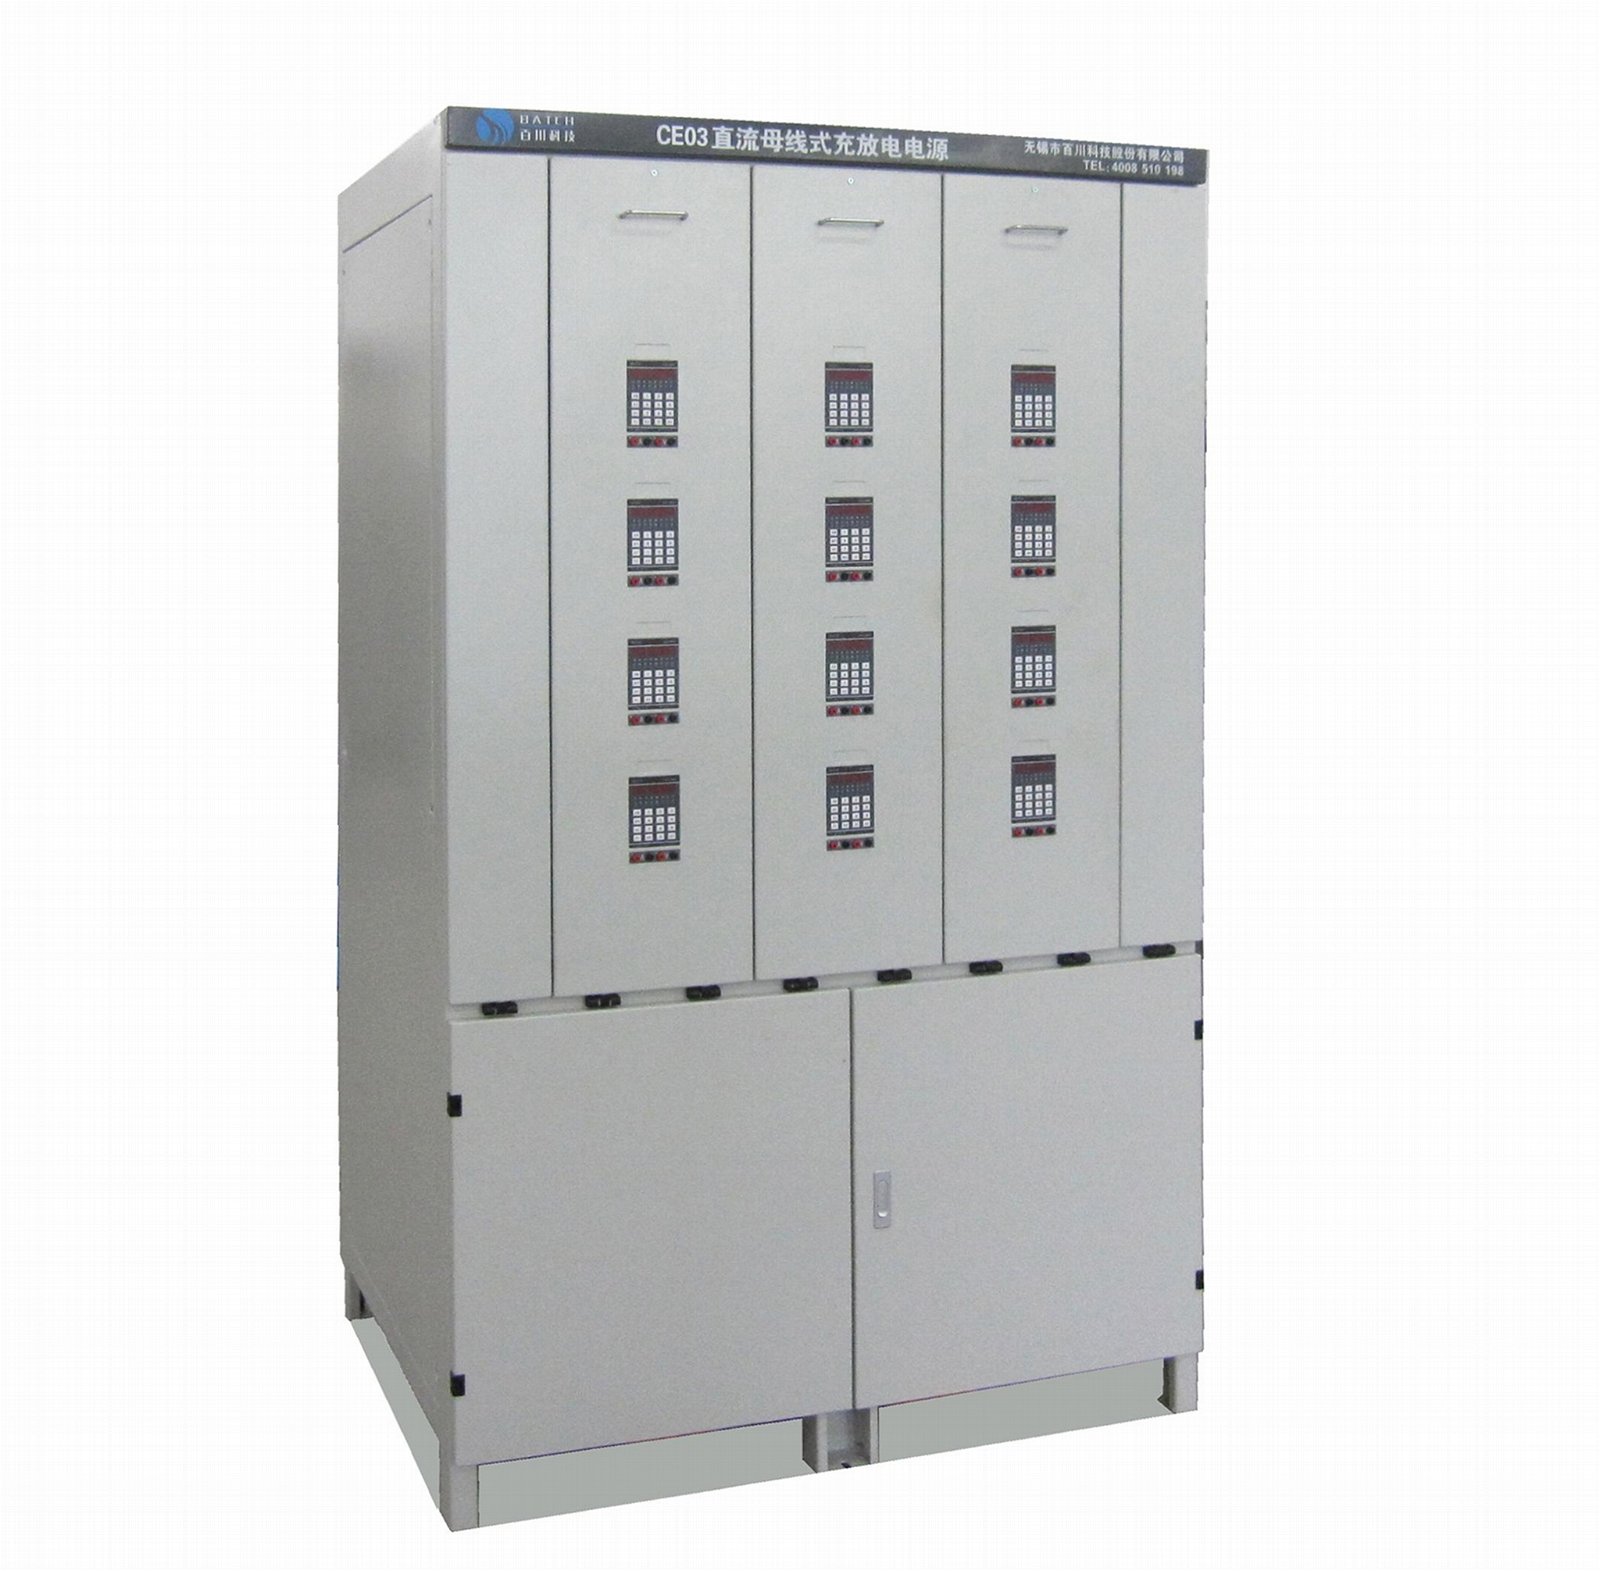 CE03Medium/large-capacity battery charger/discharger